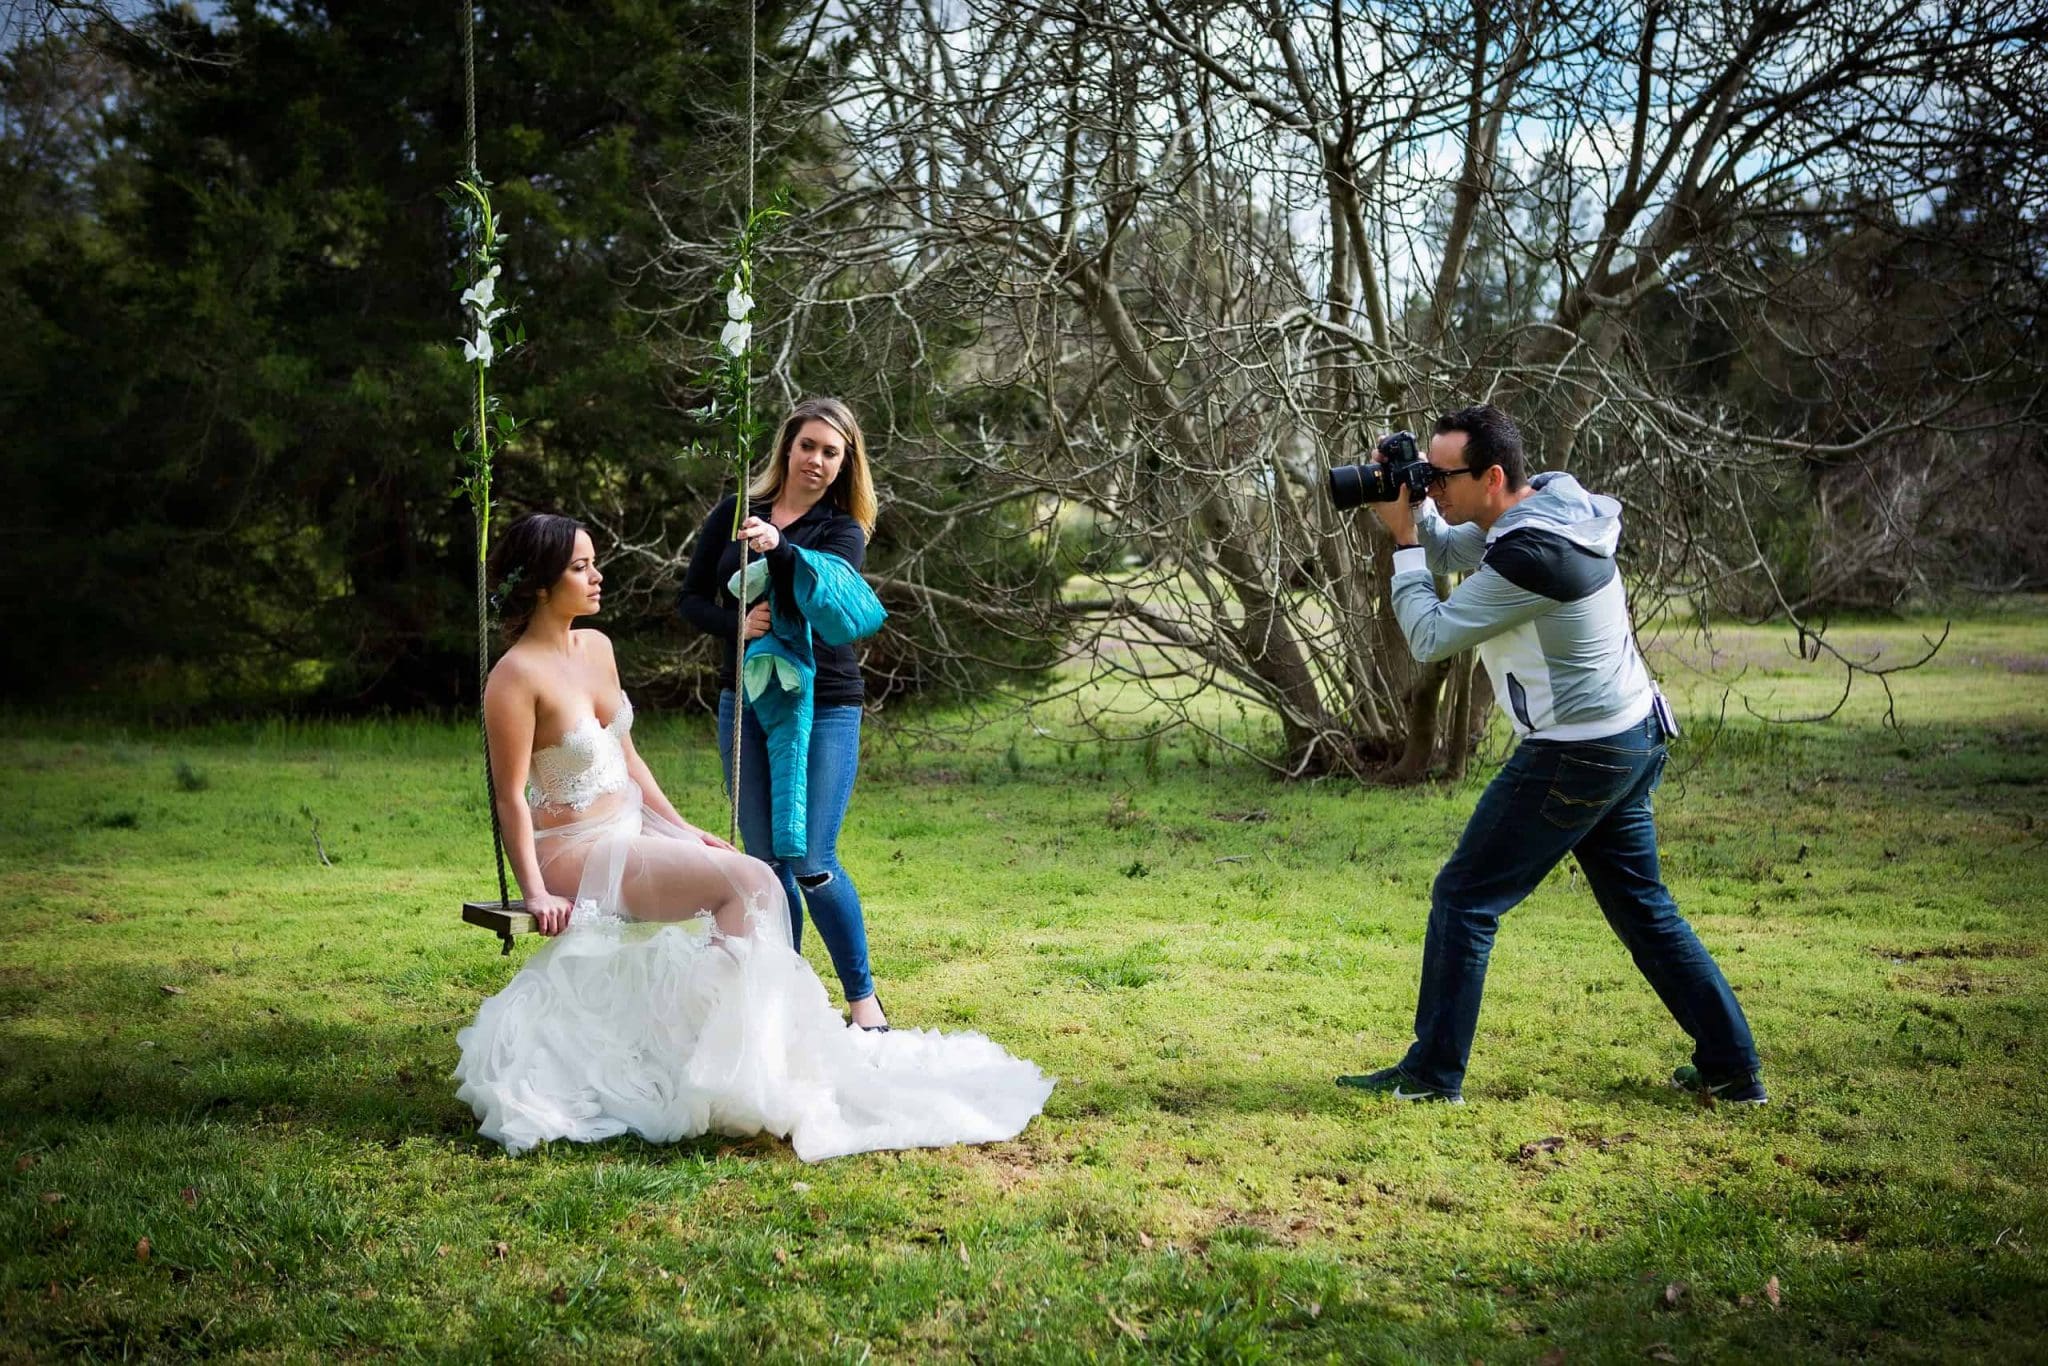 Jessica and Ross Costanza coaching a boudoir client through posing during an outdoor boudoir session